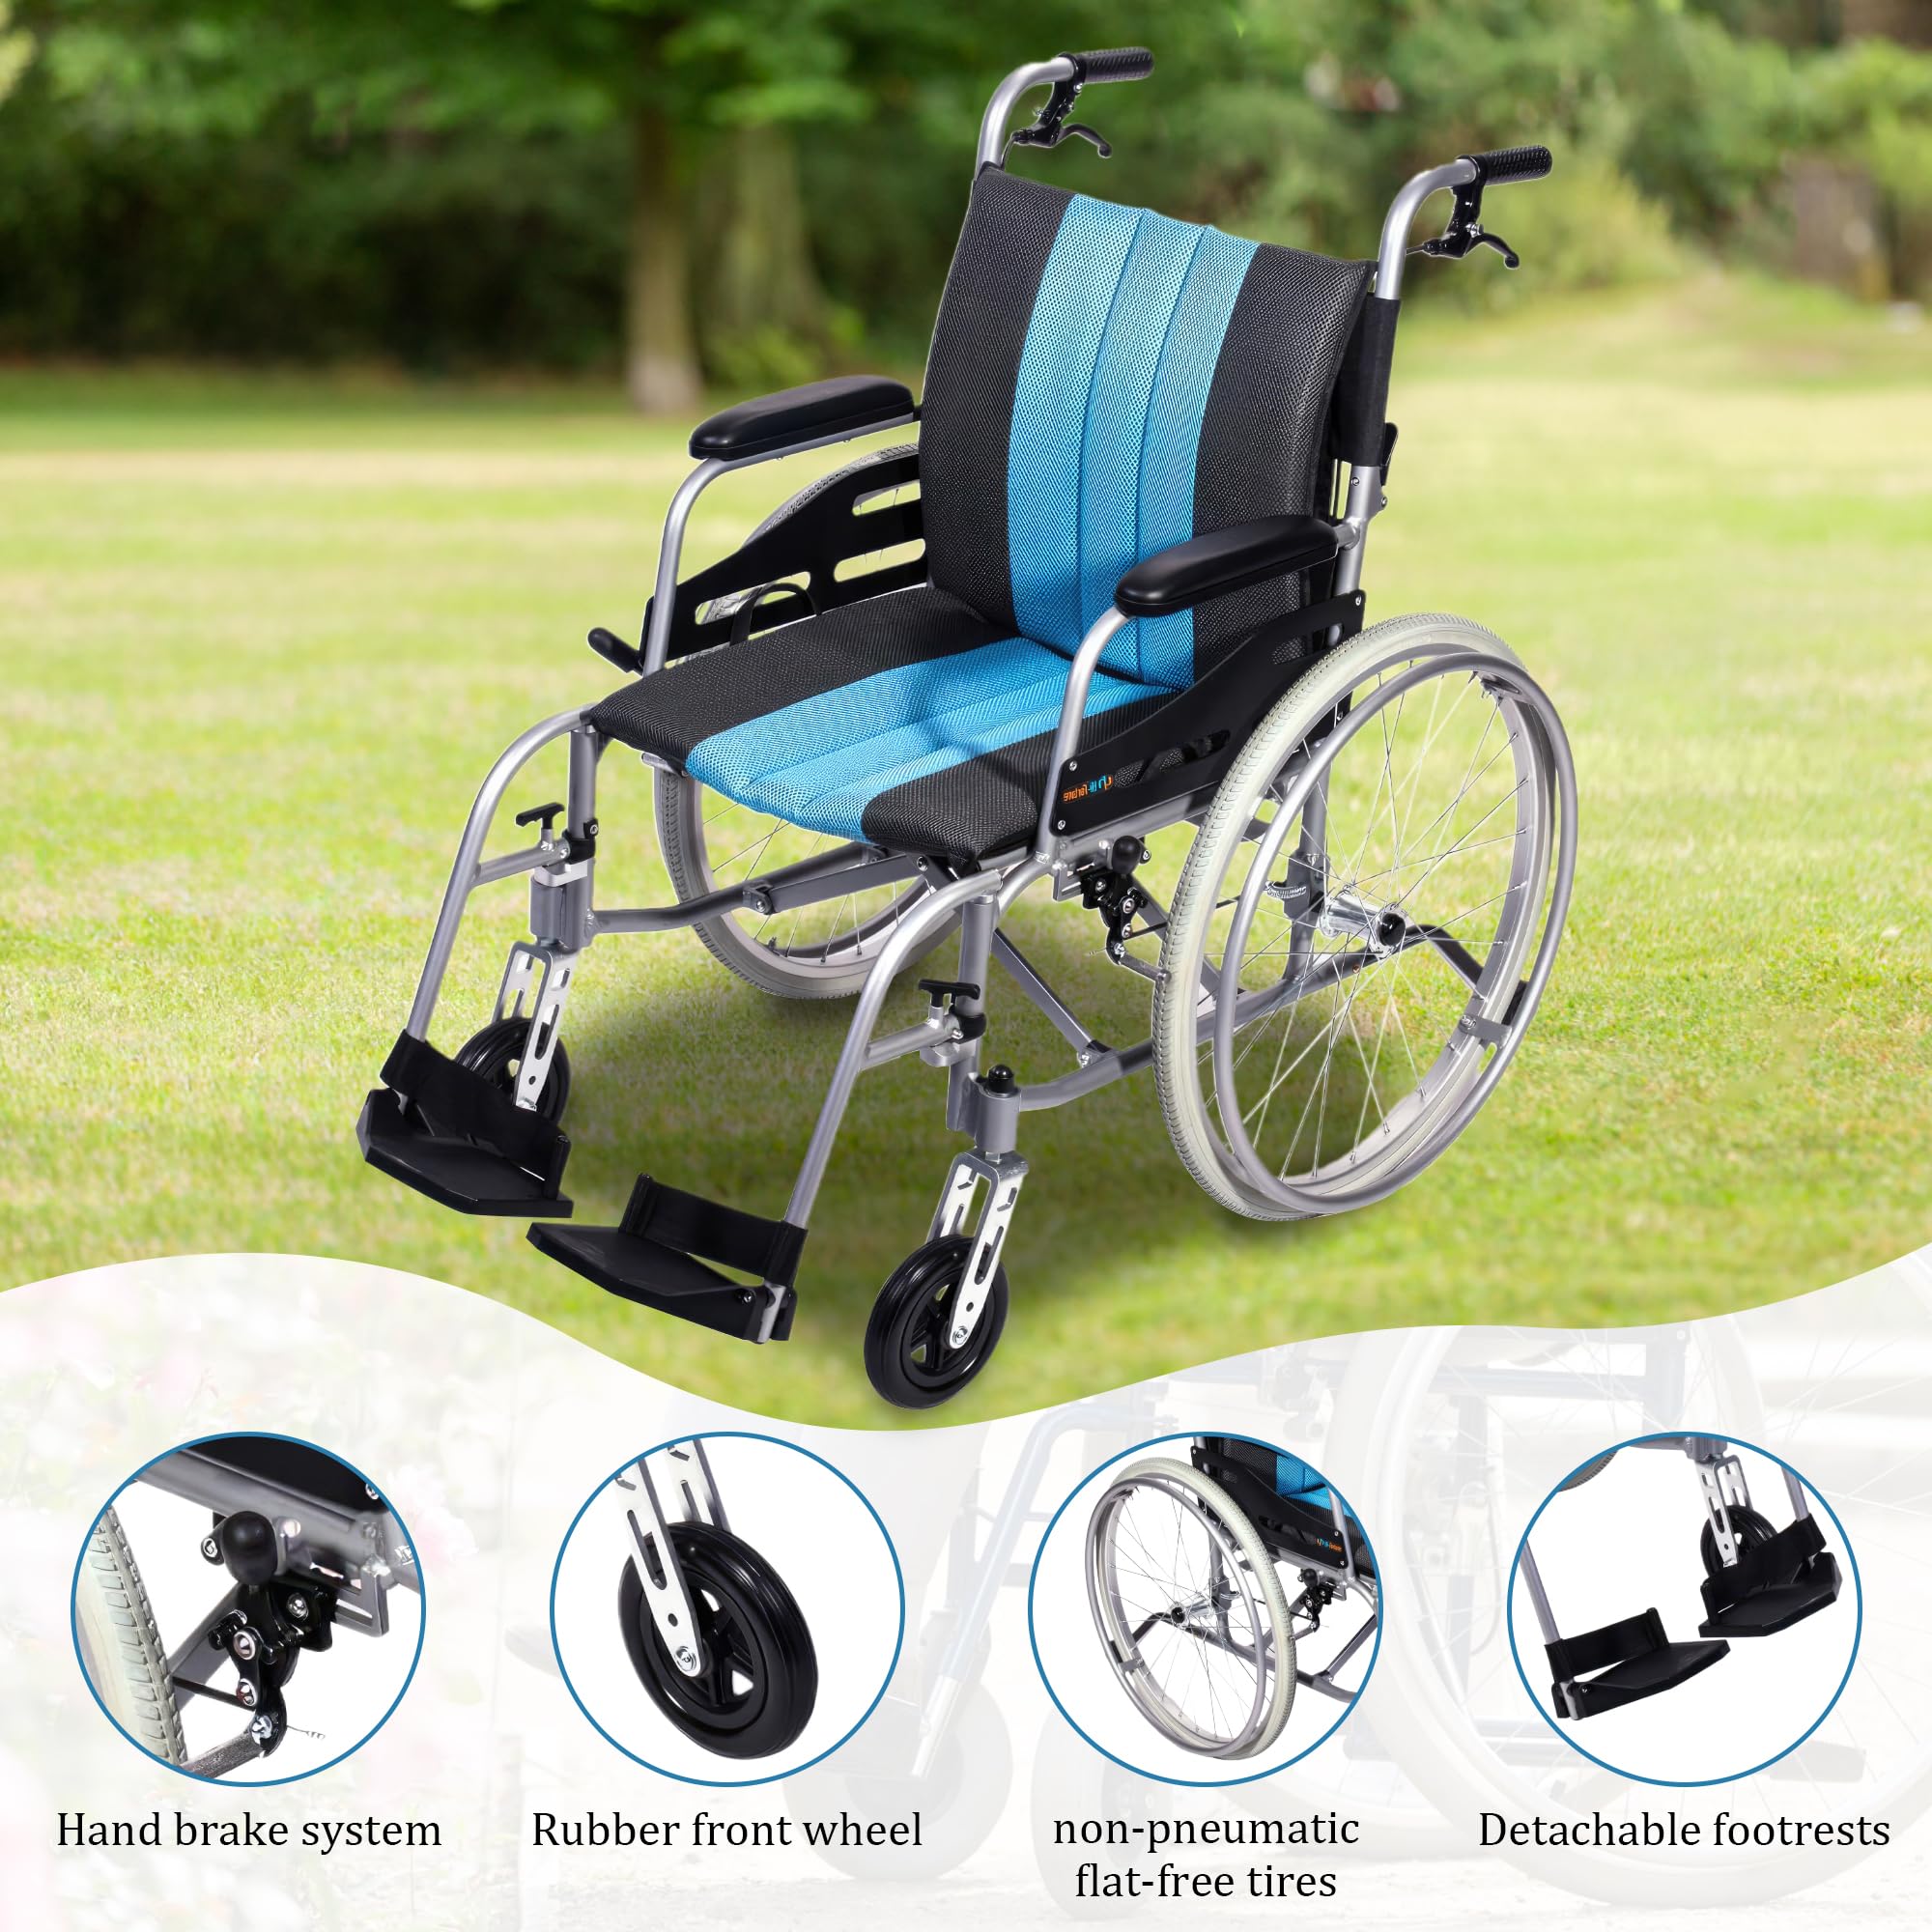 SUMELL Magnesium Lightweight Wheelchair - 21lbs Self Propelled Chair with Travel Bag and Cushion, Portable and Folding 17.5” W Seat, Park & Brake Anti Tipper, Swing Away Footrests, Ultra Light, Blue